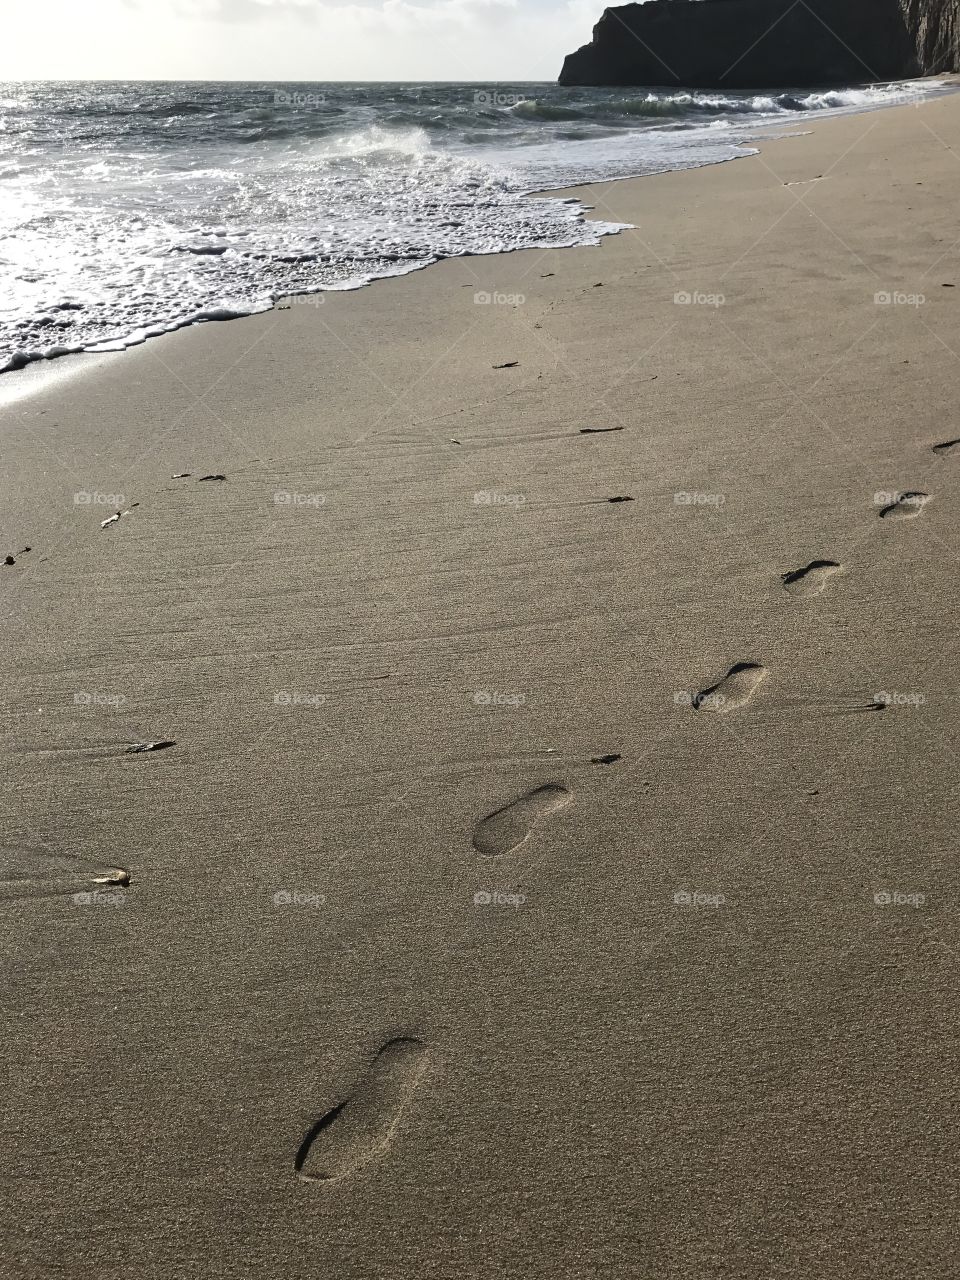 The footprints of a photographer running through damp sand on the beach, trying to catch the last of the day’s sun on the waves and cliffs of the coast. 